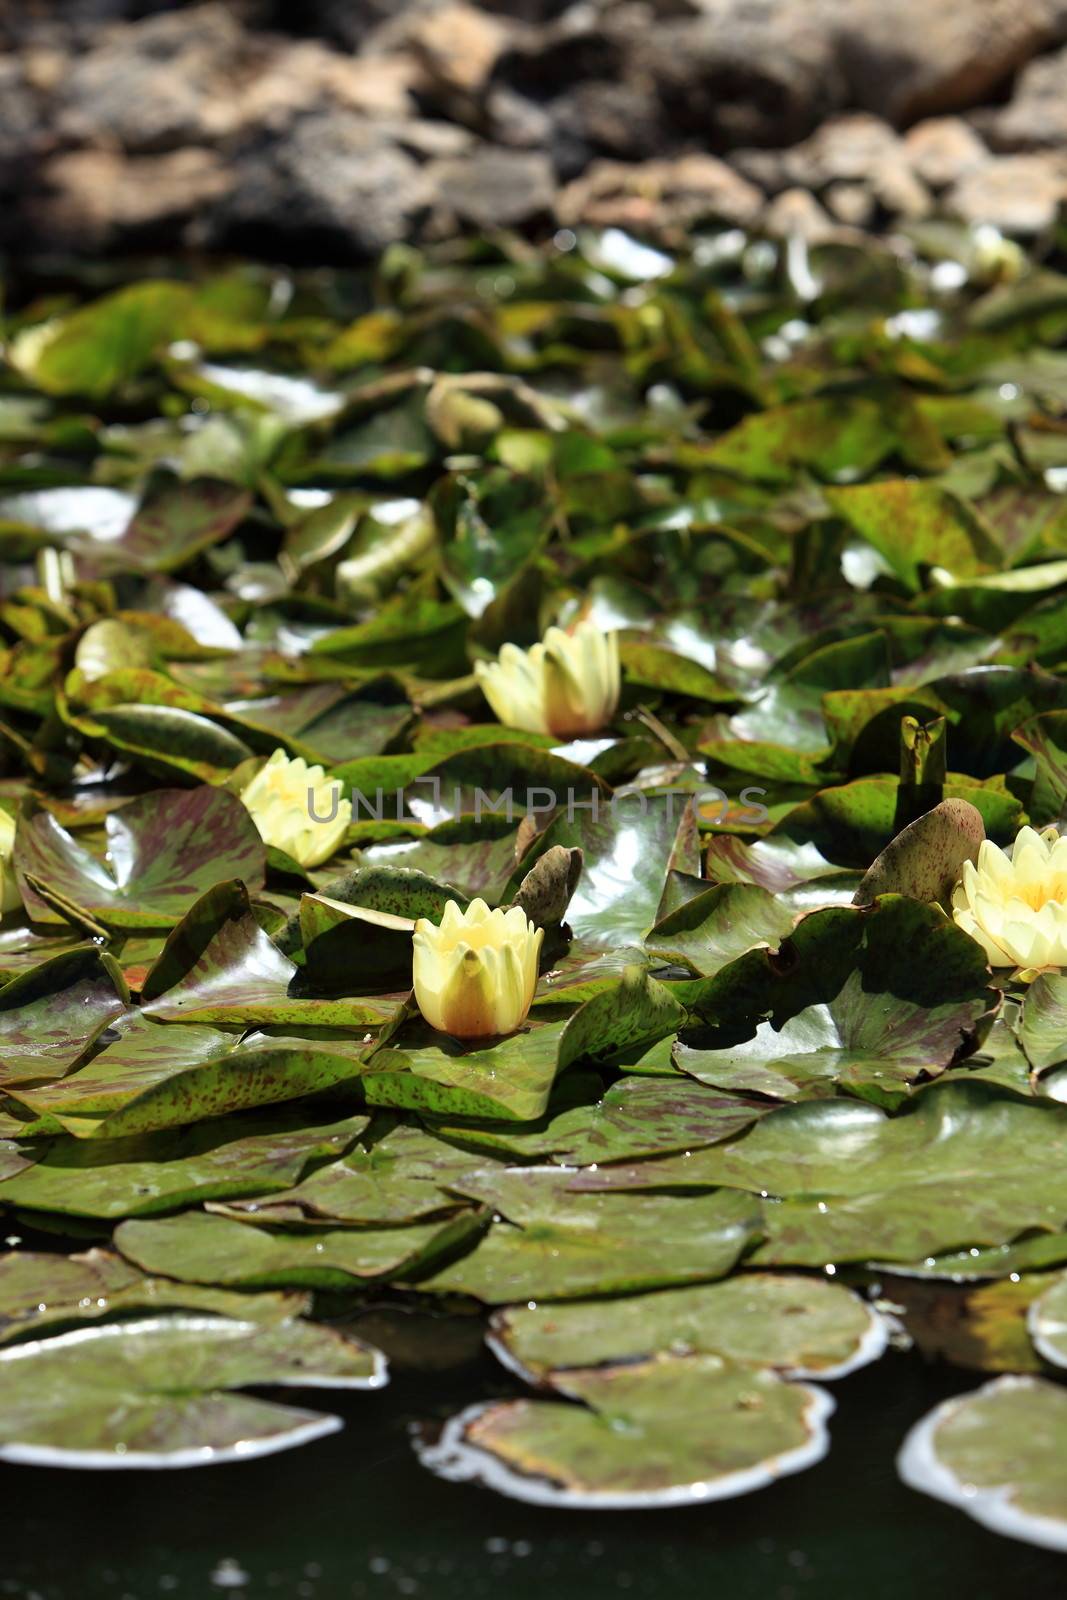 Flowering ornamental yellow water lilies with their pads, or floating leaves, in a pond